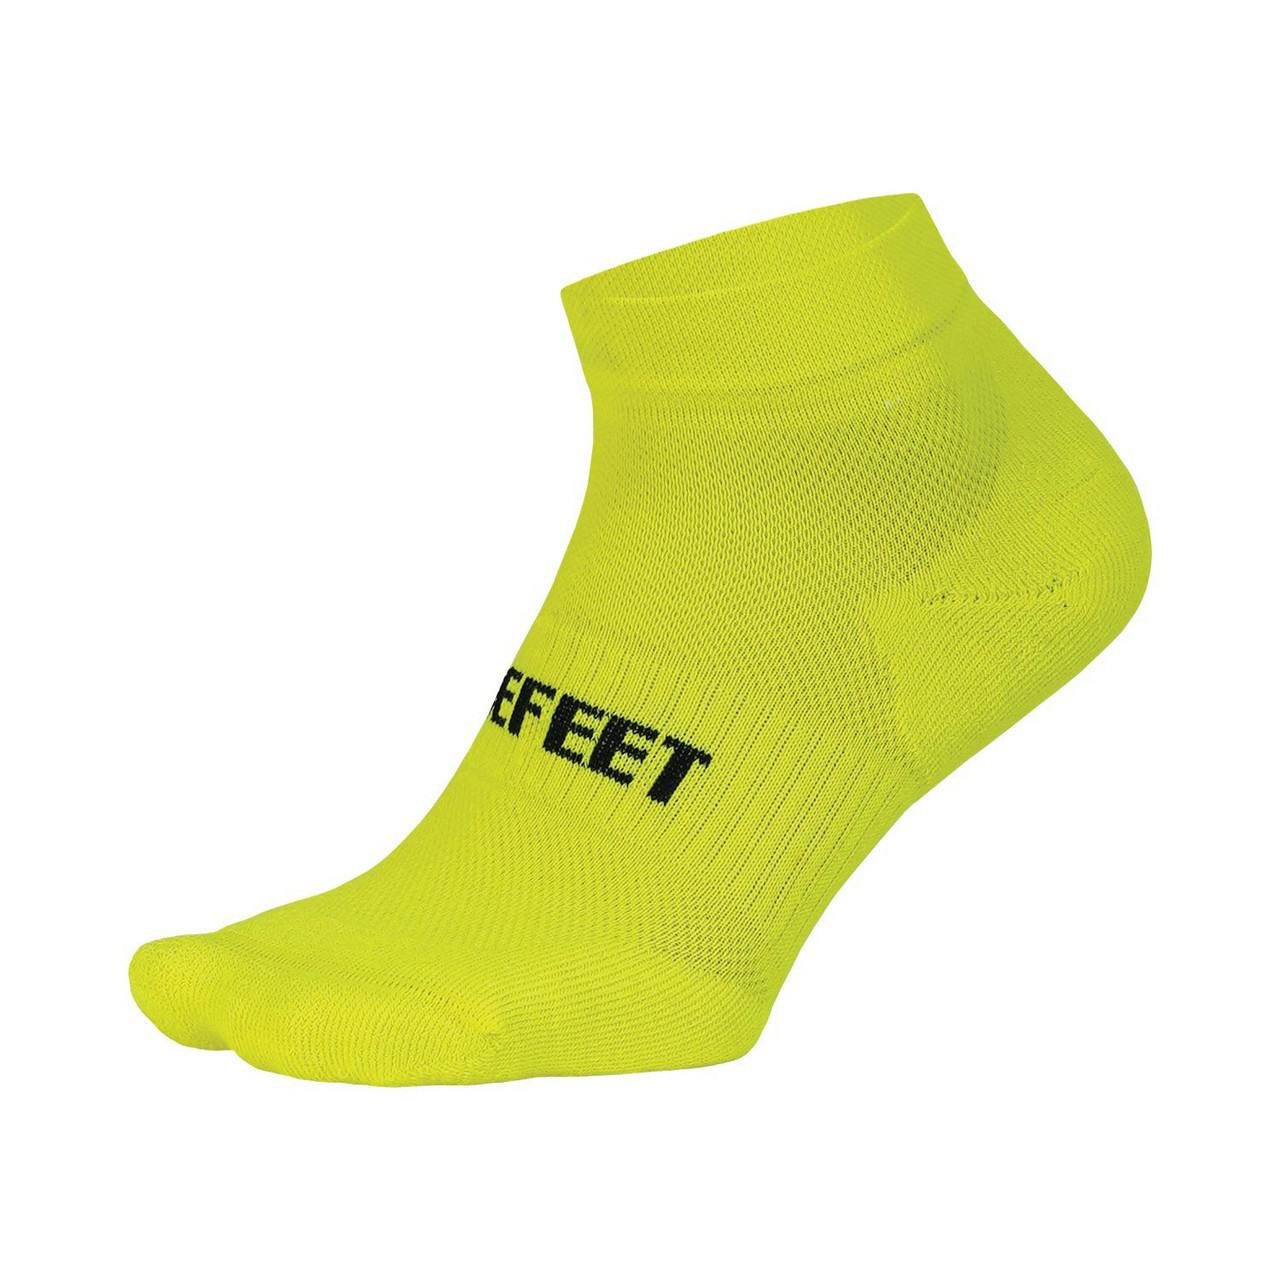 All Day 1" Assorted 3-Pack socks Black, White, Neon Yellow